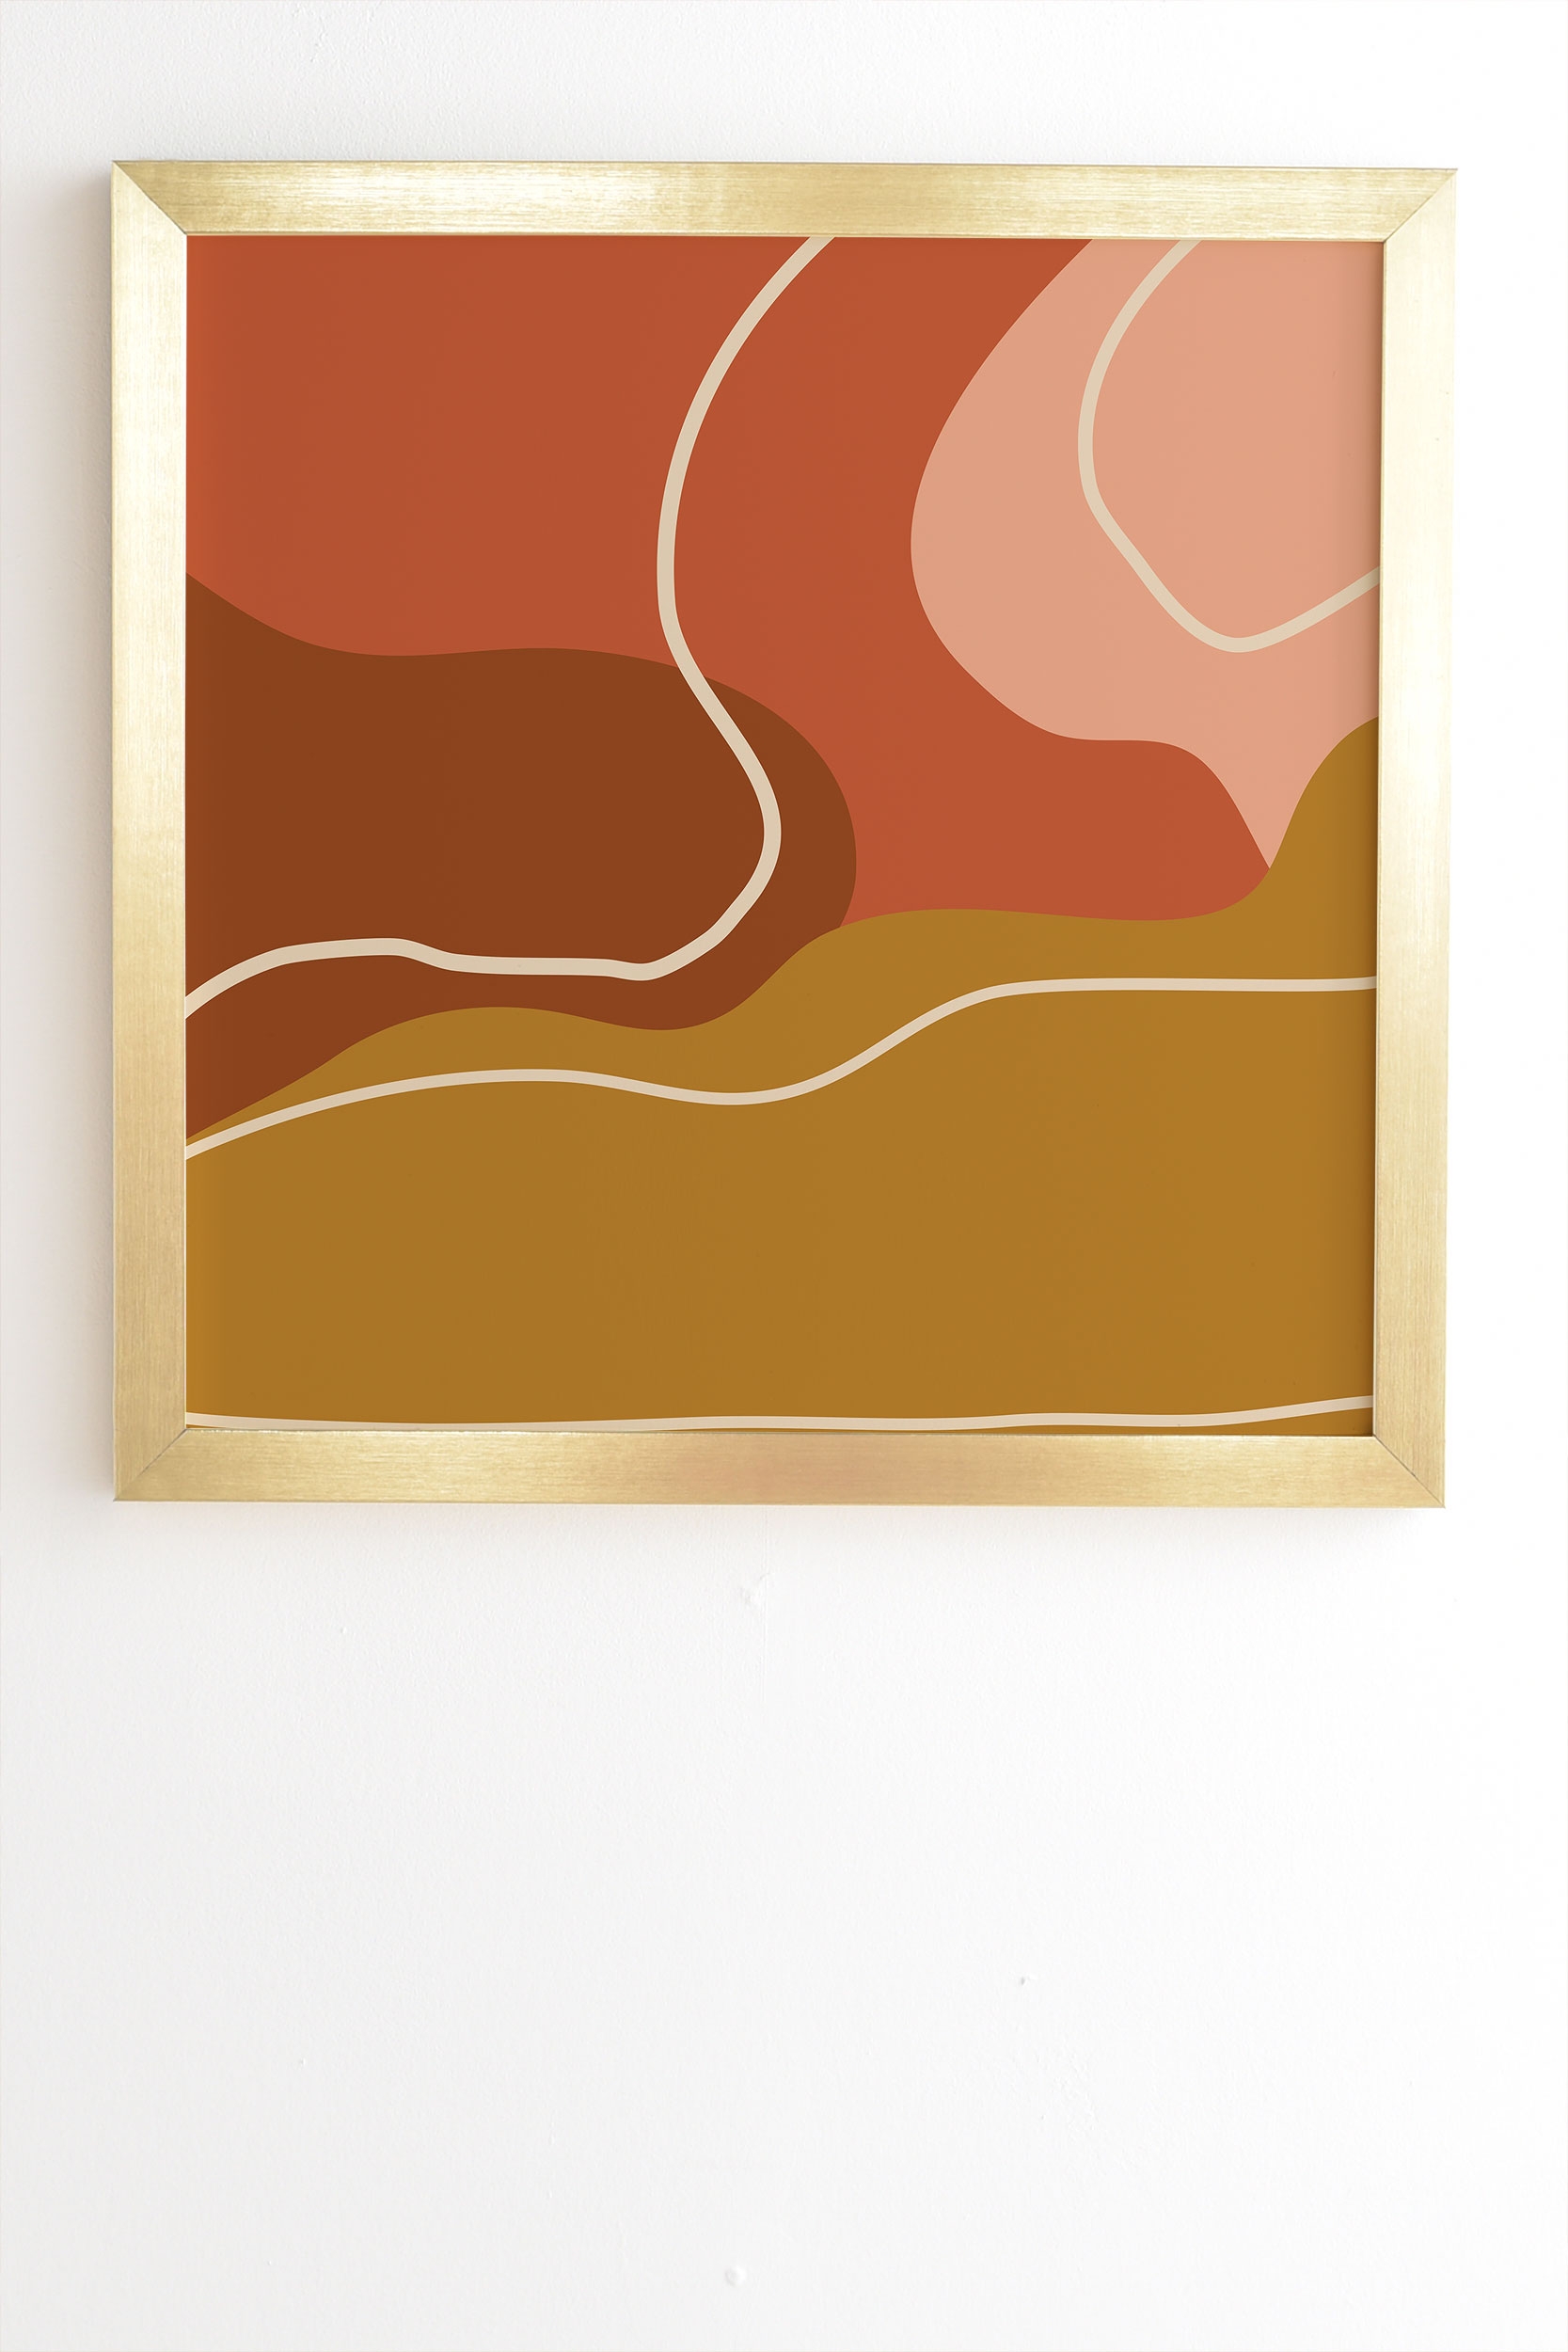 Abstract Organic Shapes In Zen by June Journal - Framed Wall Art Basic Gold 8" x 9.5" - Image 1